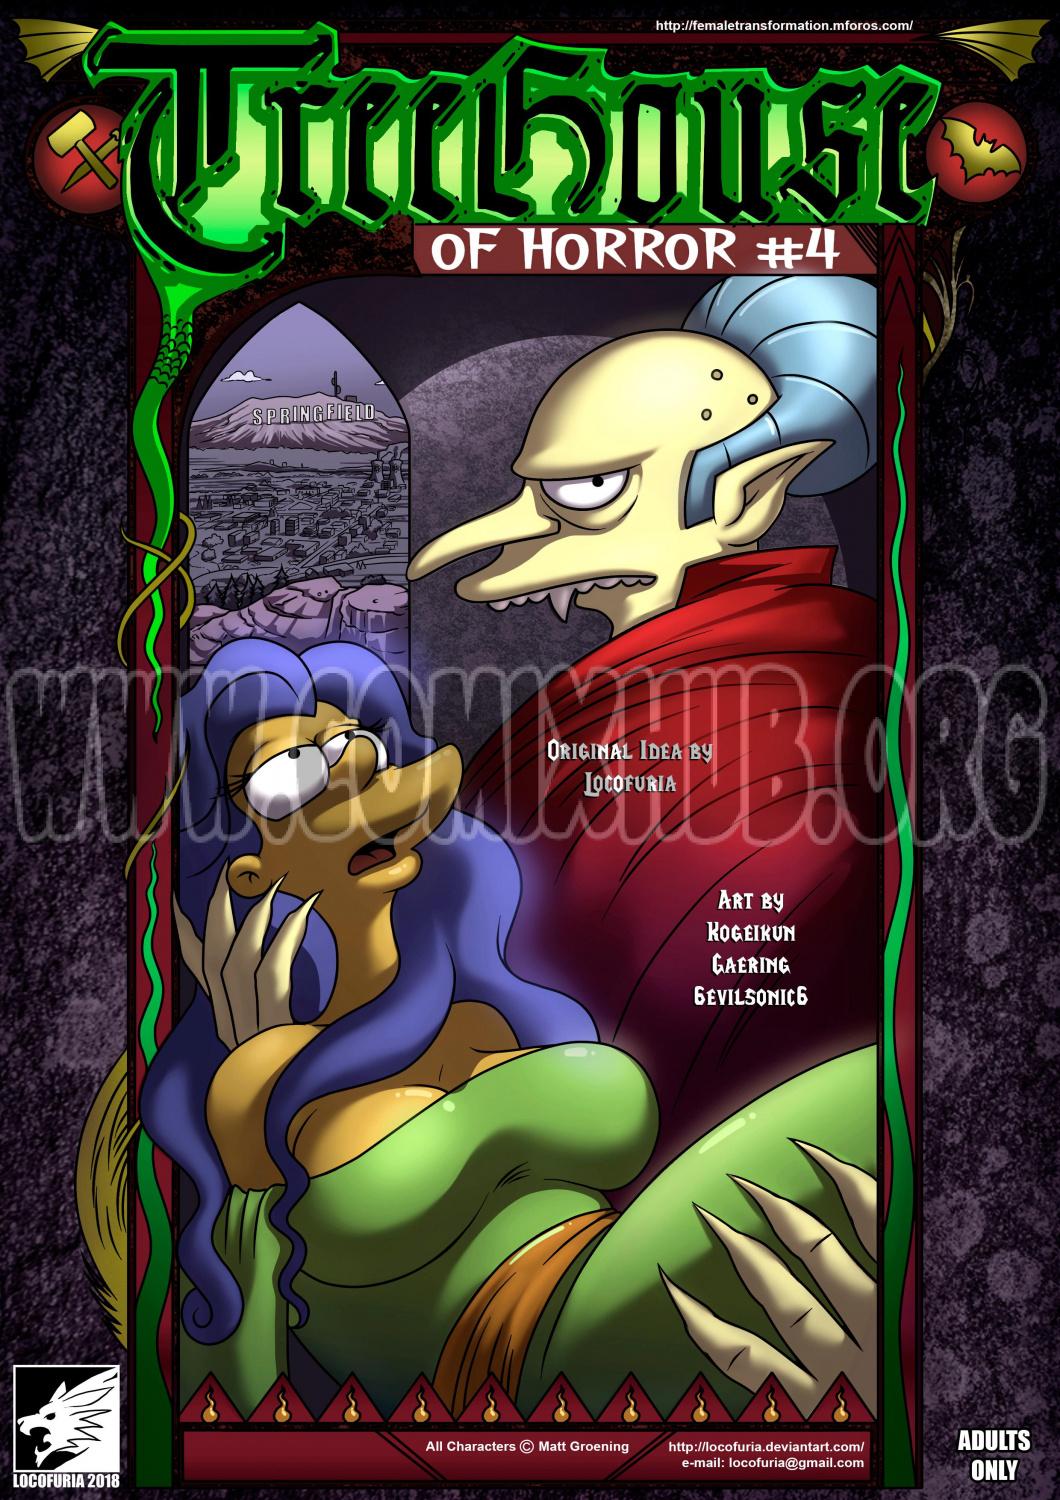 Treehouse of Horror 4 Straight, Anal Sex, Big Tits, Creampie, Transformation